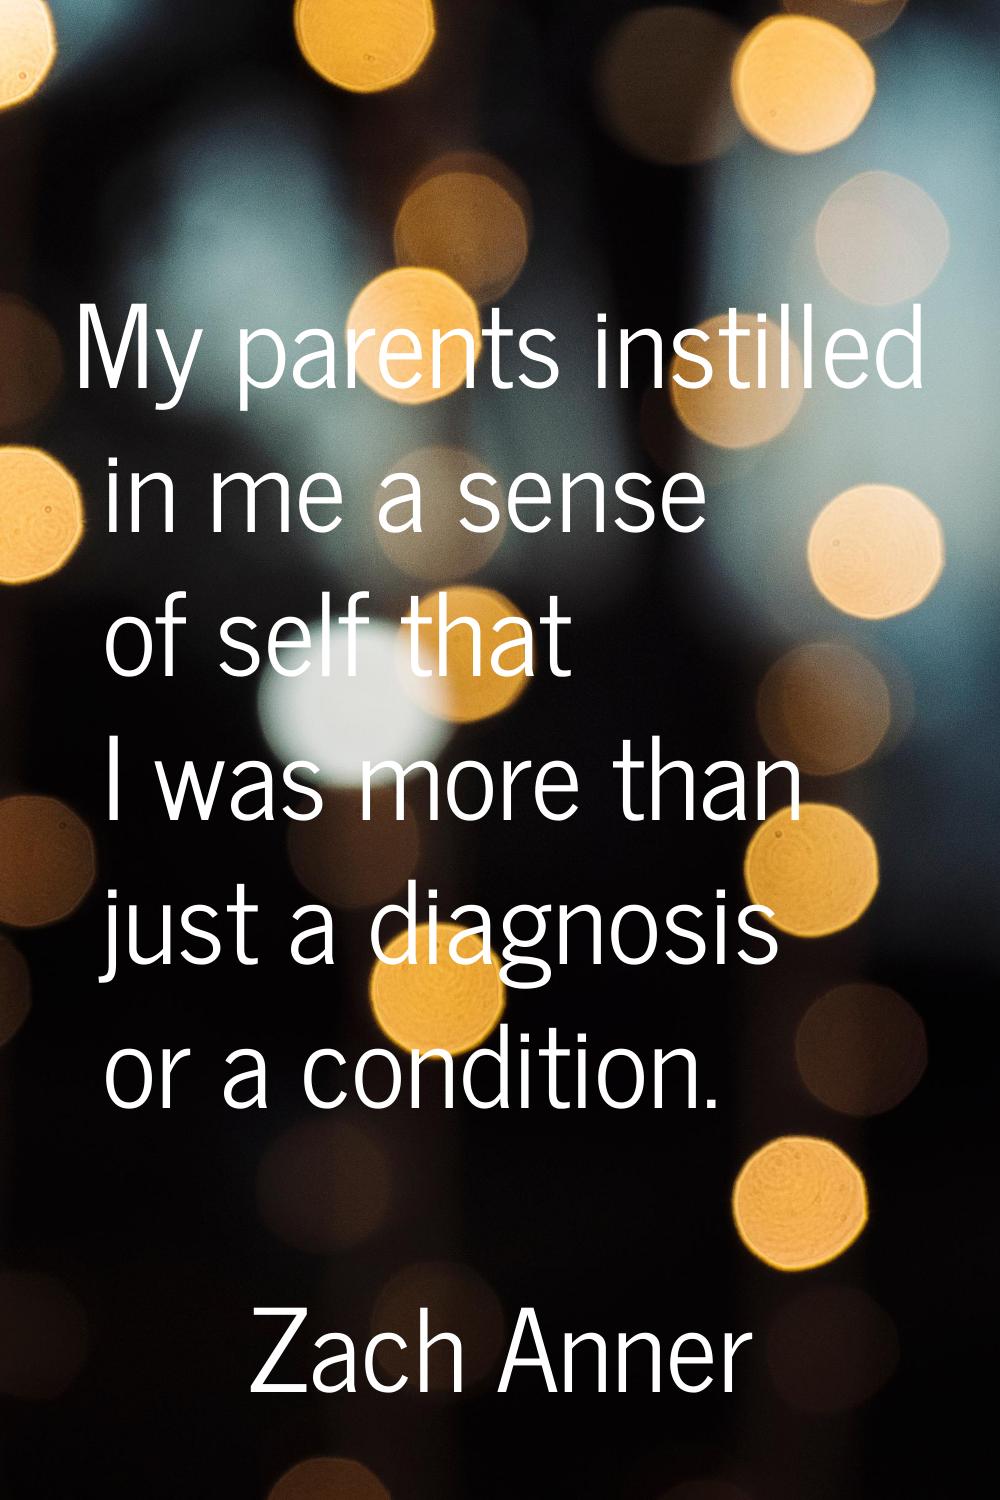 My parents instilled in me a sense of self that I was more than just a diagnosis or a condition.